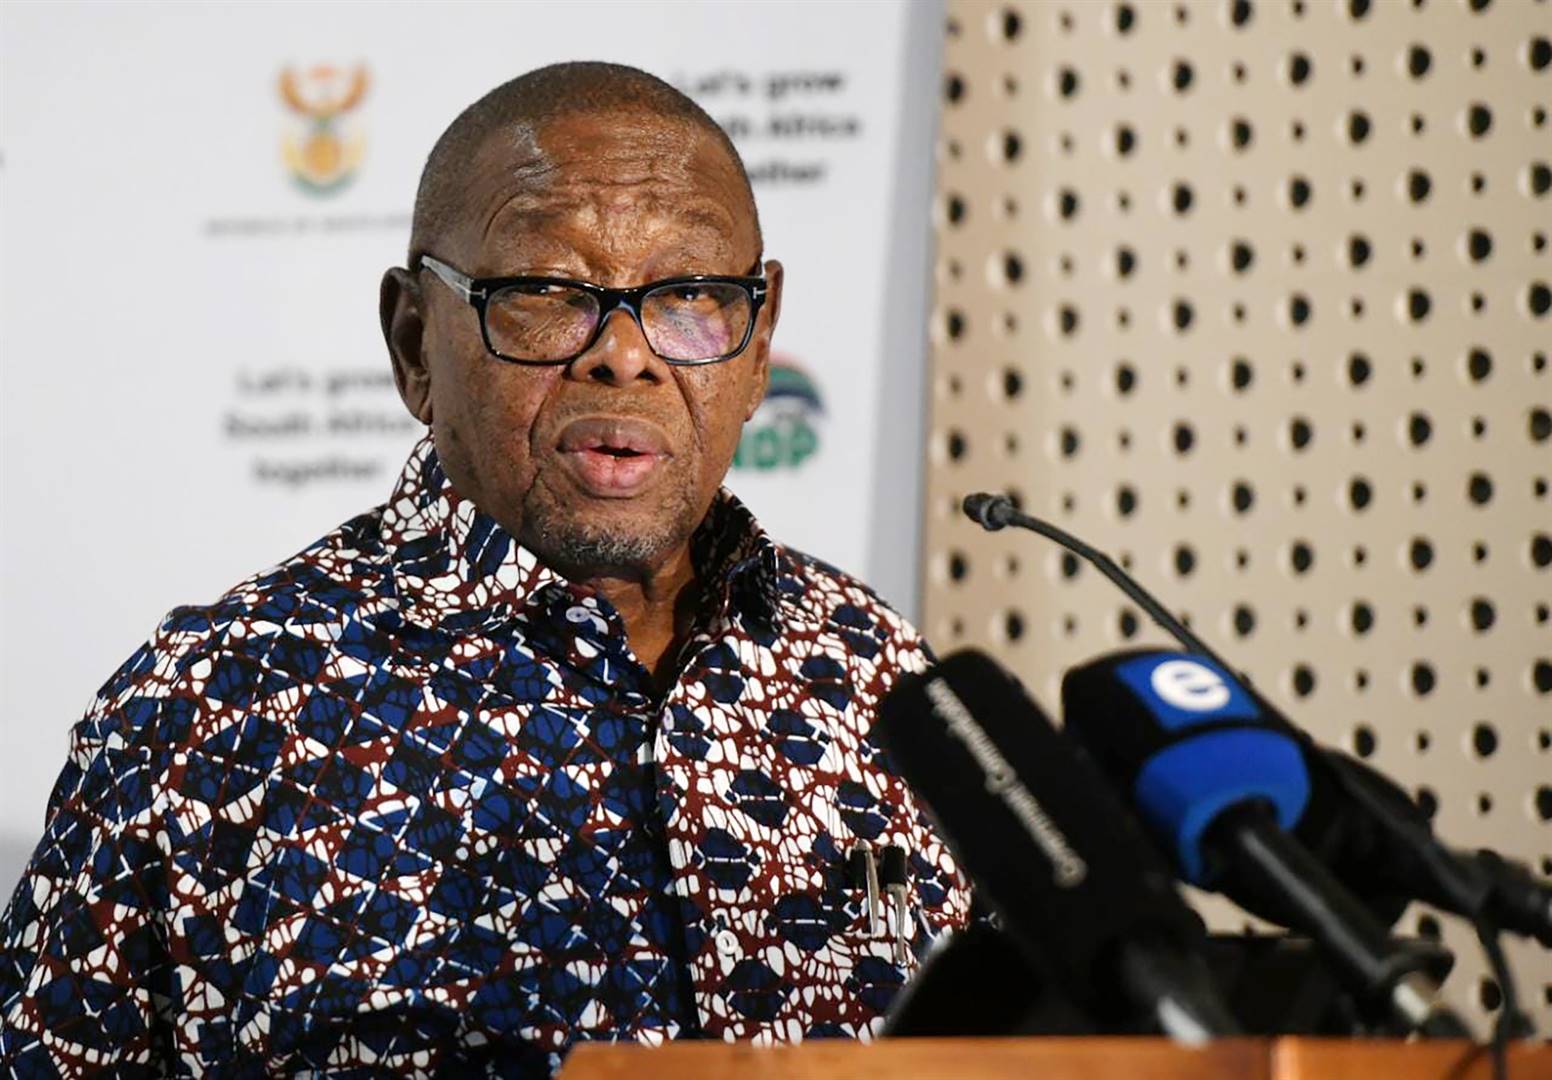 Higher Education Science and Technology Minister, Blade Nzimande welcomed the arrest of a man who allegedly stabbed a female student.  